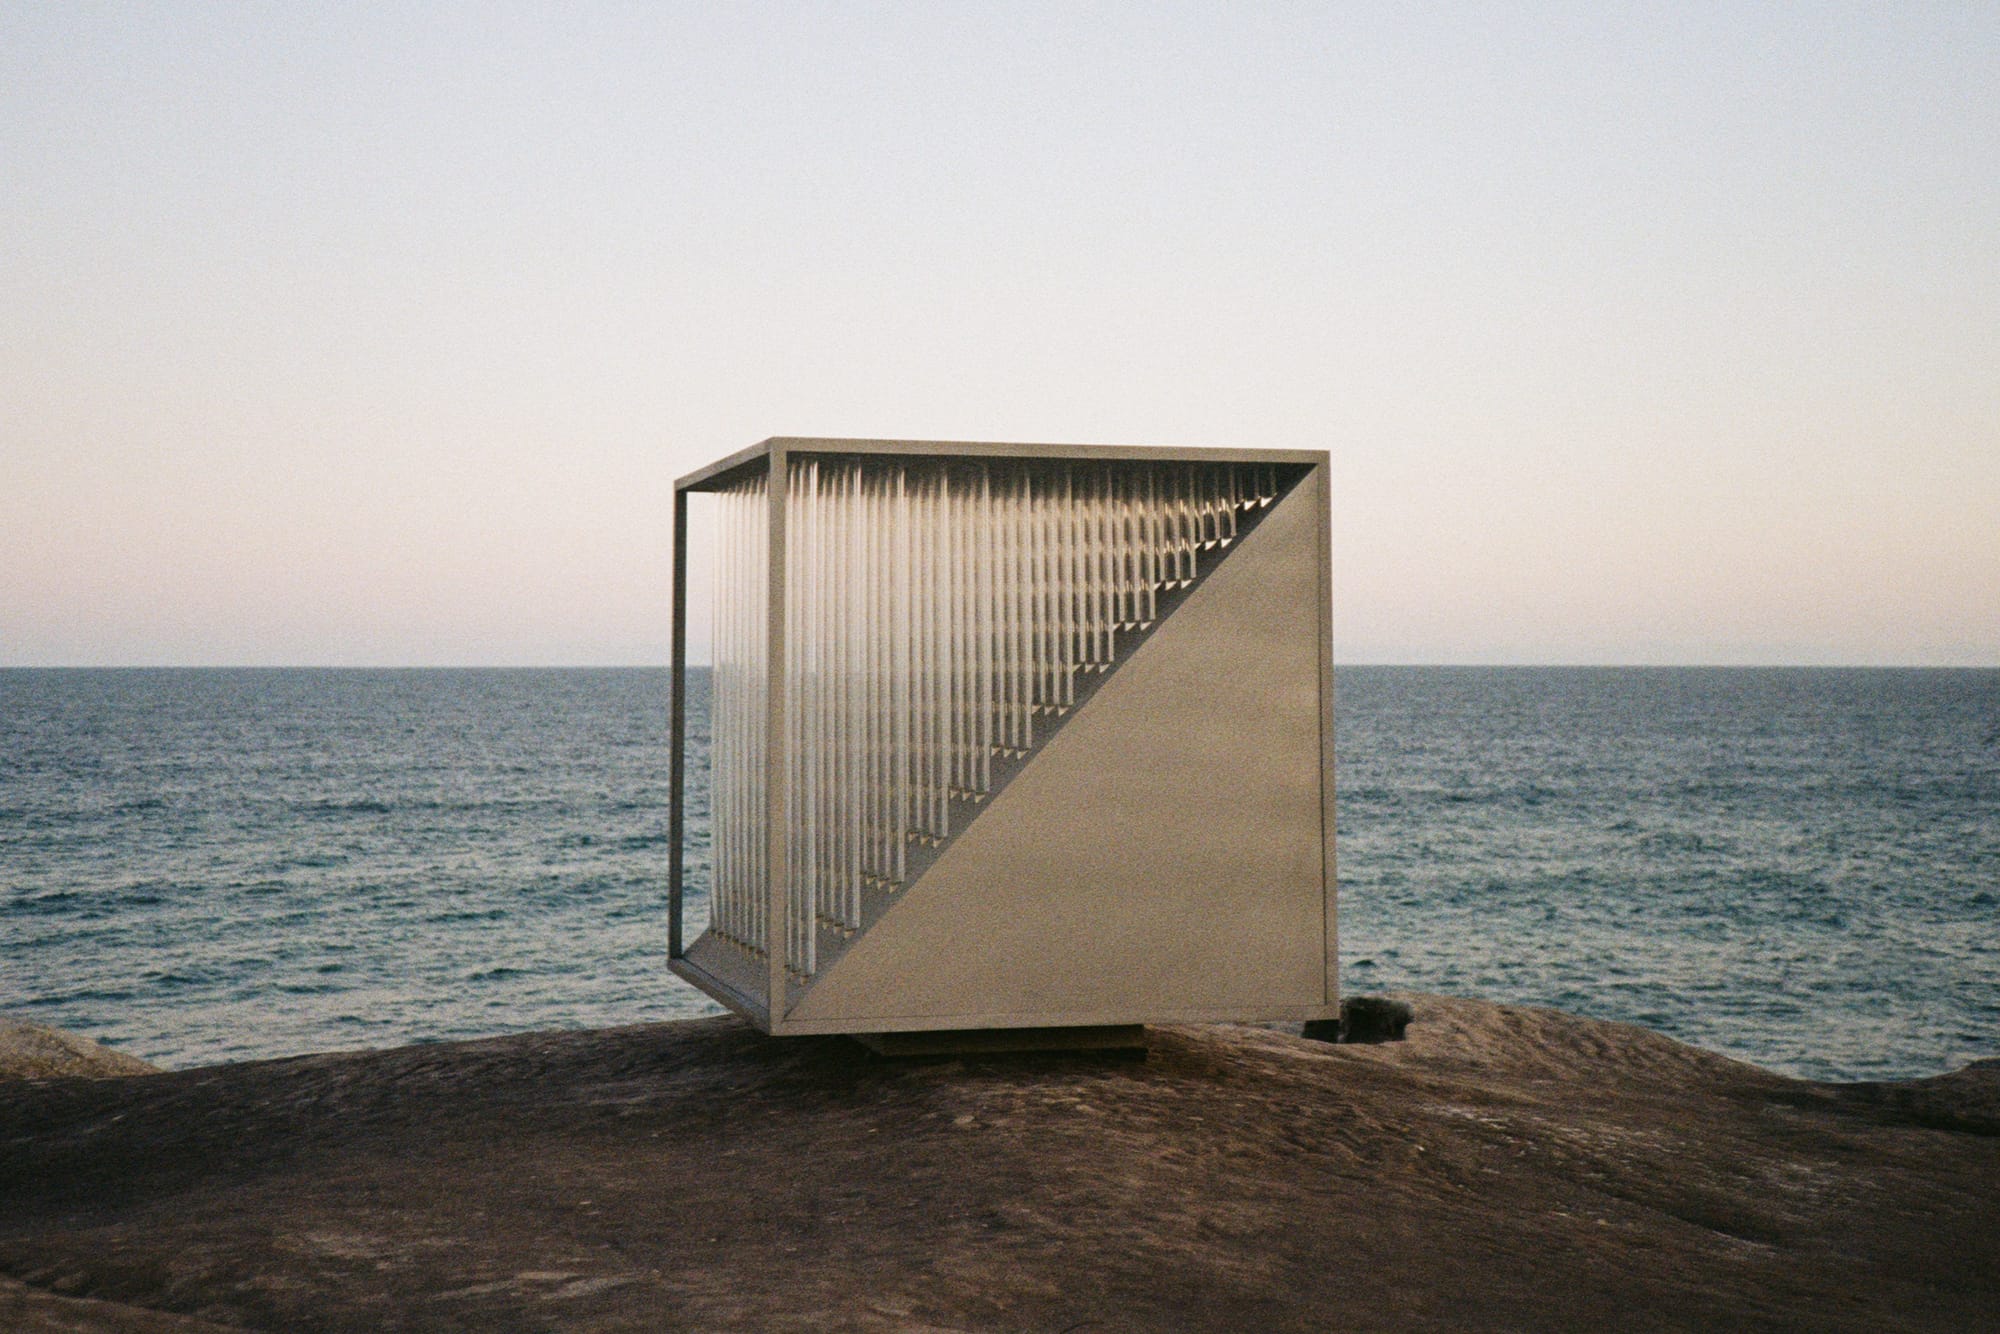 Array 8 by Studio Shand. Photography by Benjamin Jay Shand. Metal abstract 3D cube sculpture on rock cliff overlooking ocean.